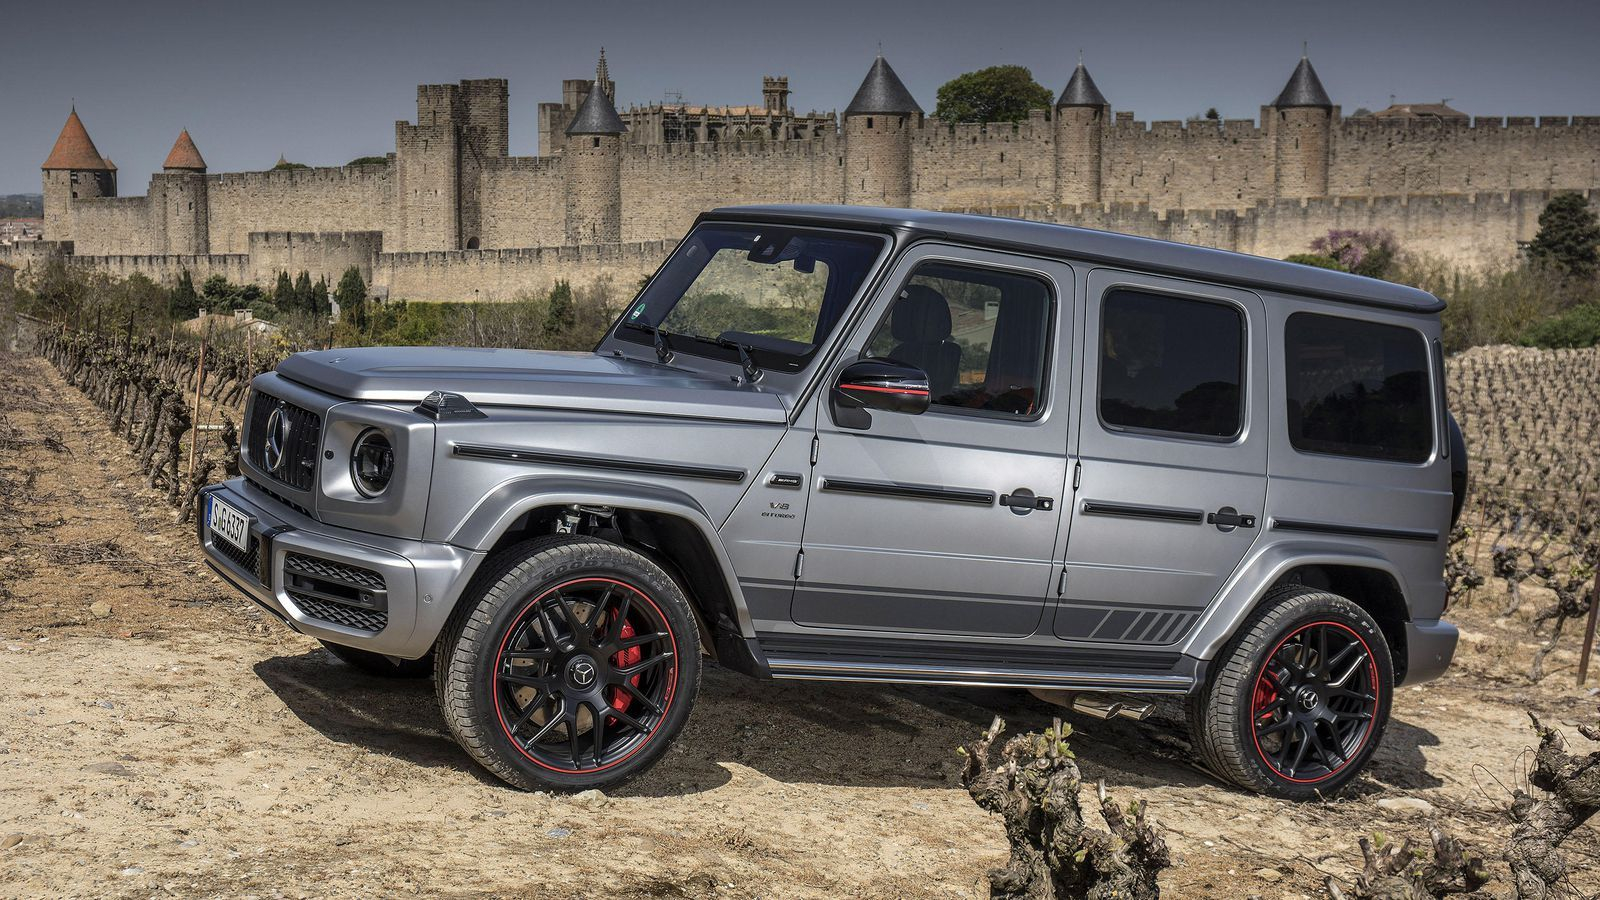 The Best G550 Mercedes Wallpapercar And Vehicle Re Car